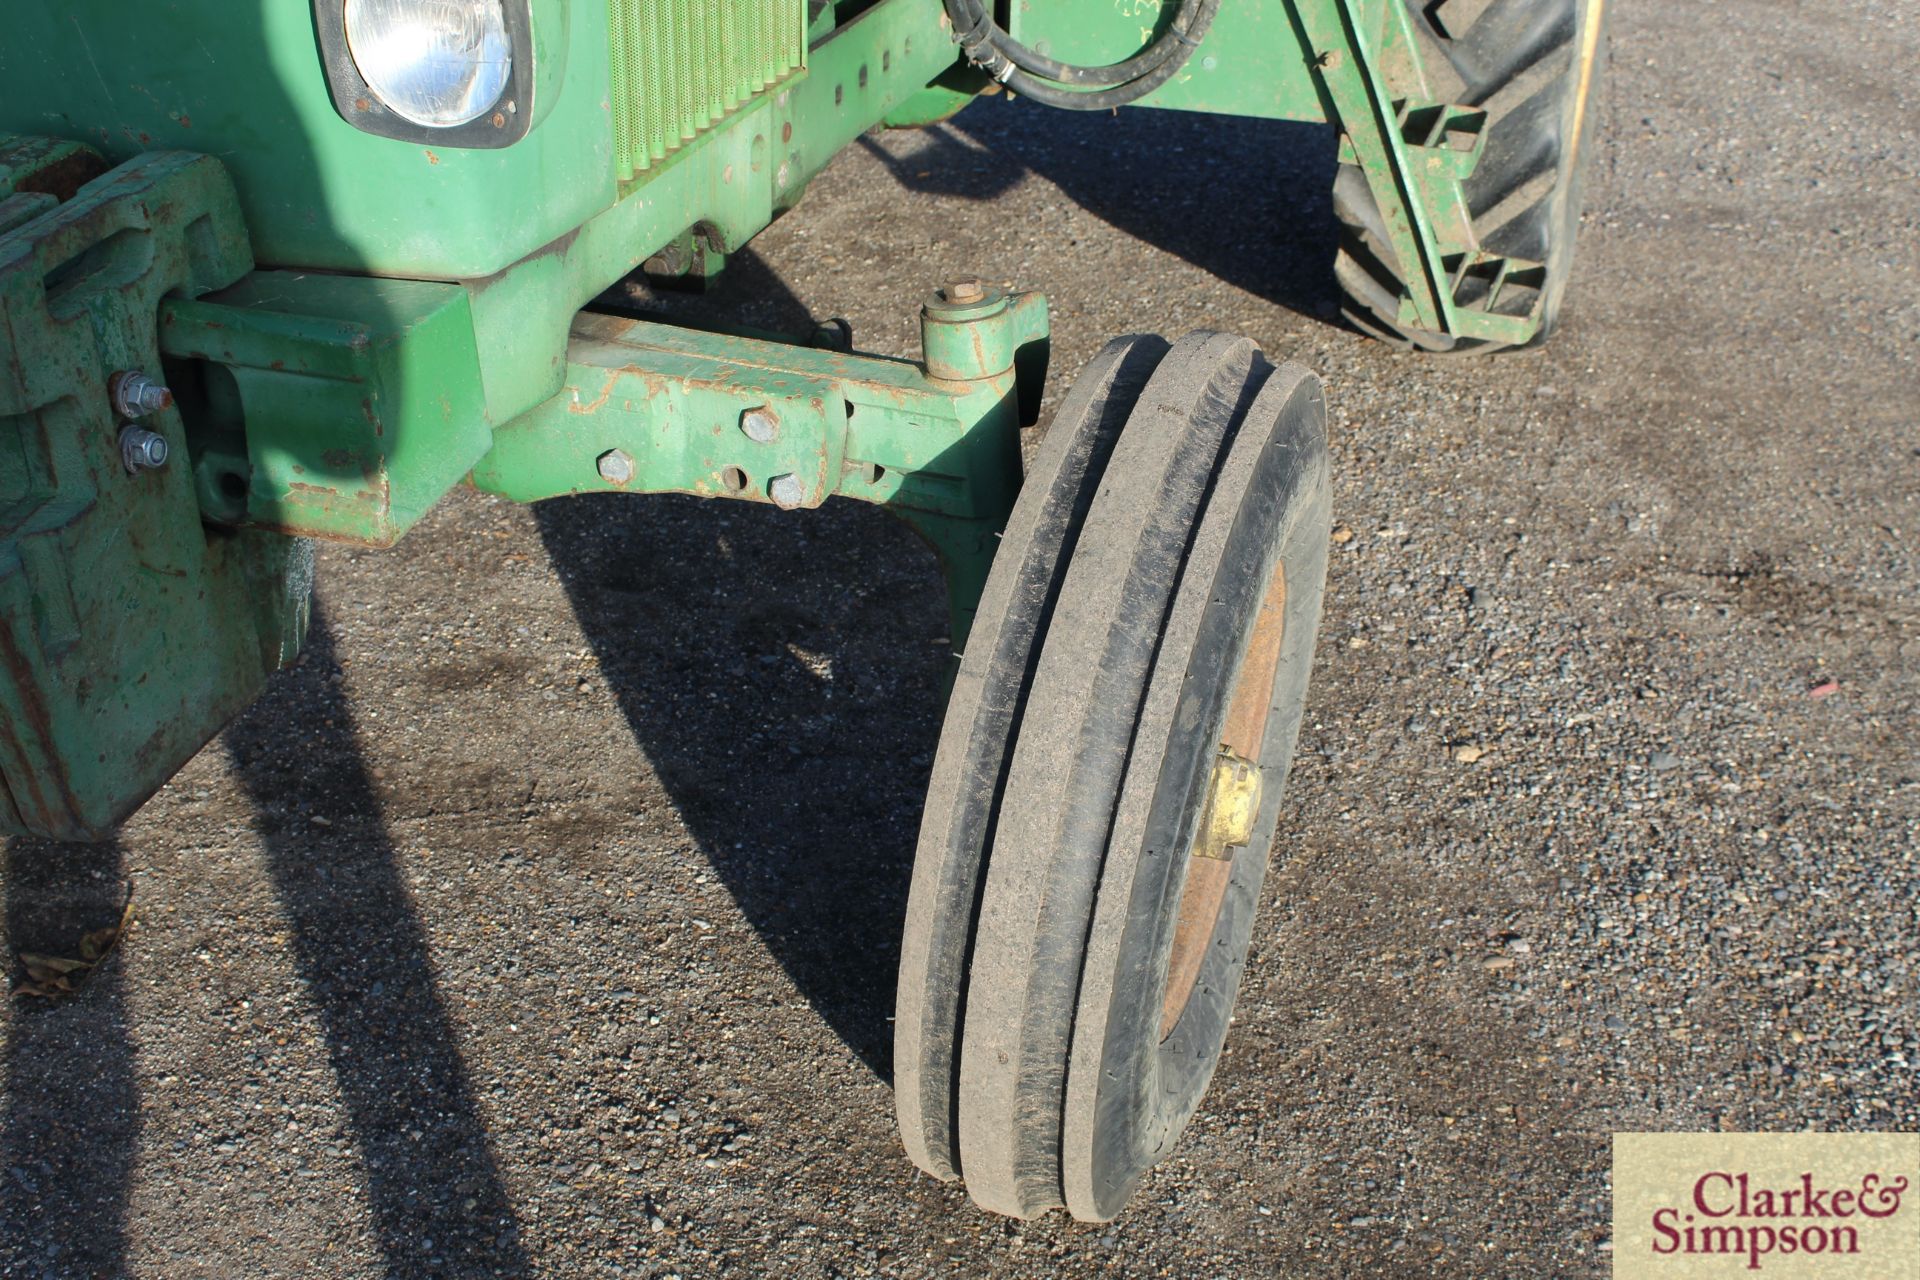 John Deere 1640 2WD tractor. Registration ETH 628V. 1980. 5,328 hours. 13.6R36 rear wheels and - Image 11 of 42